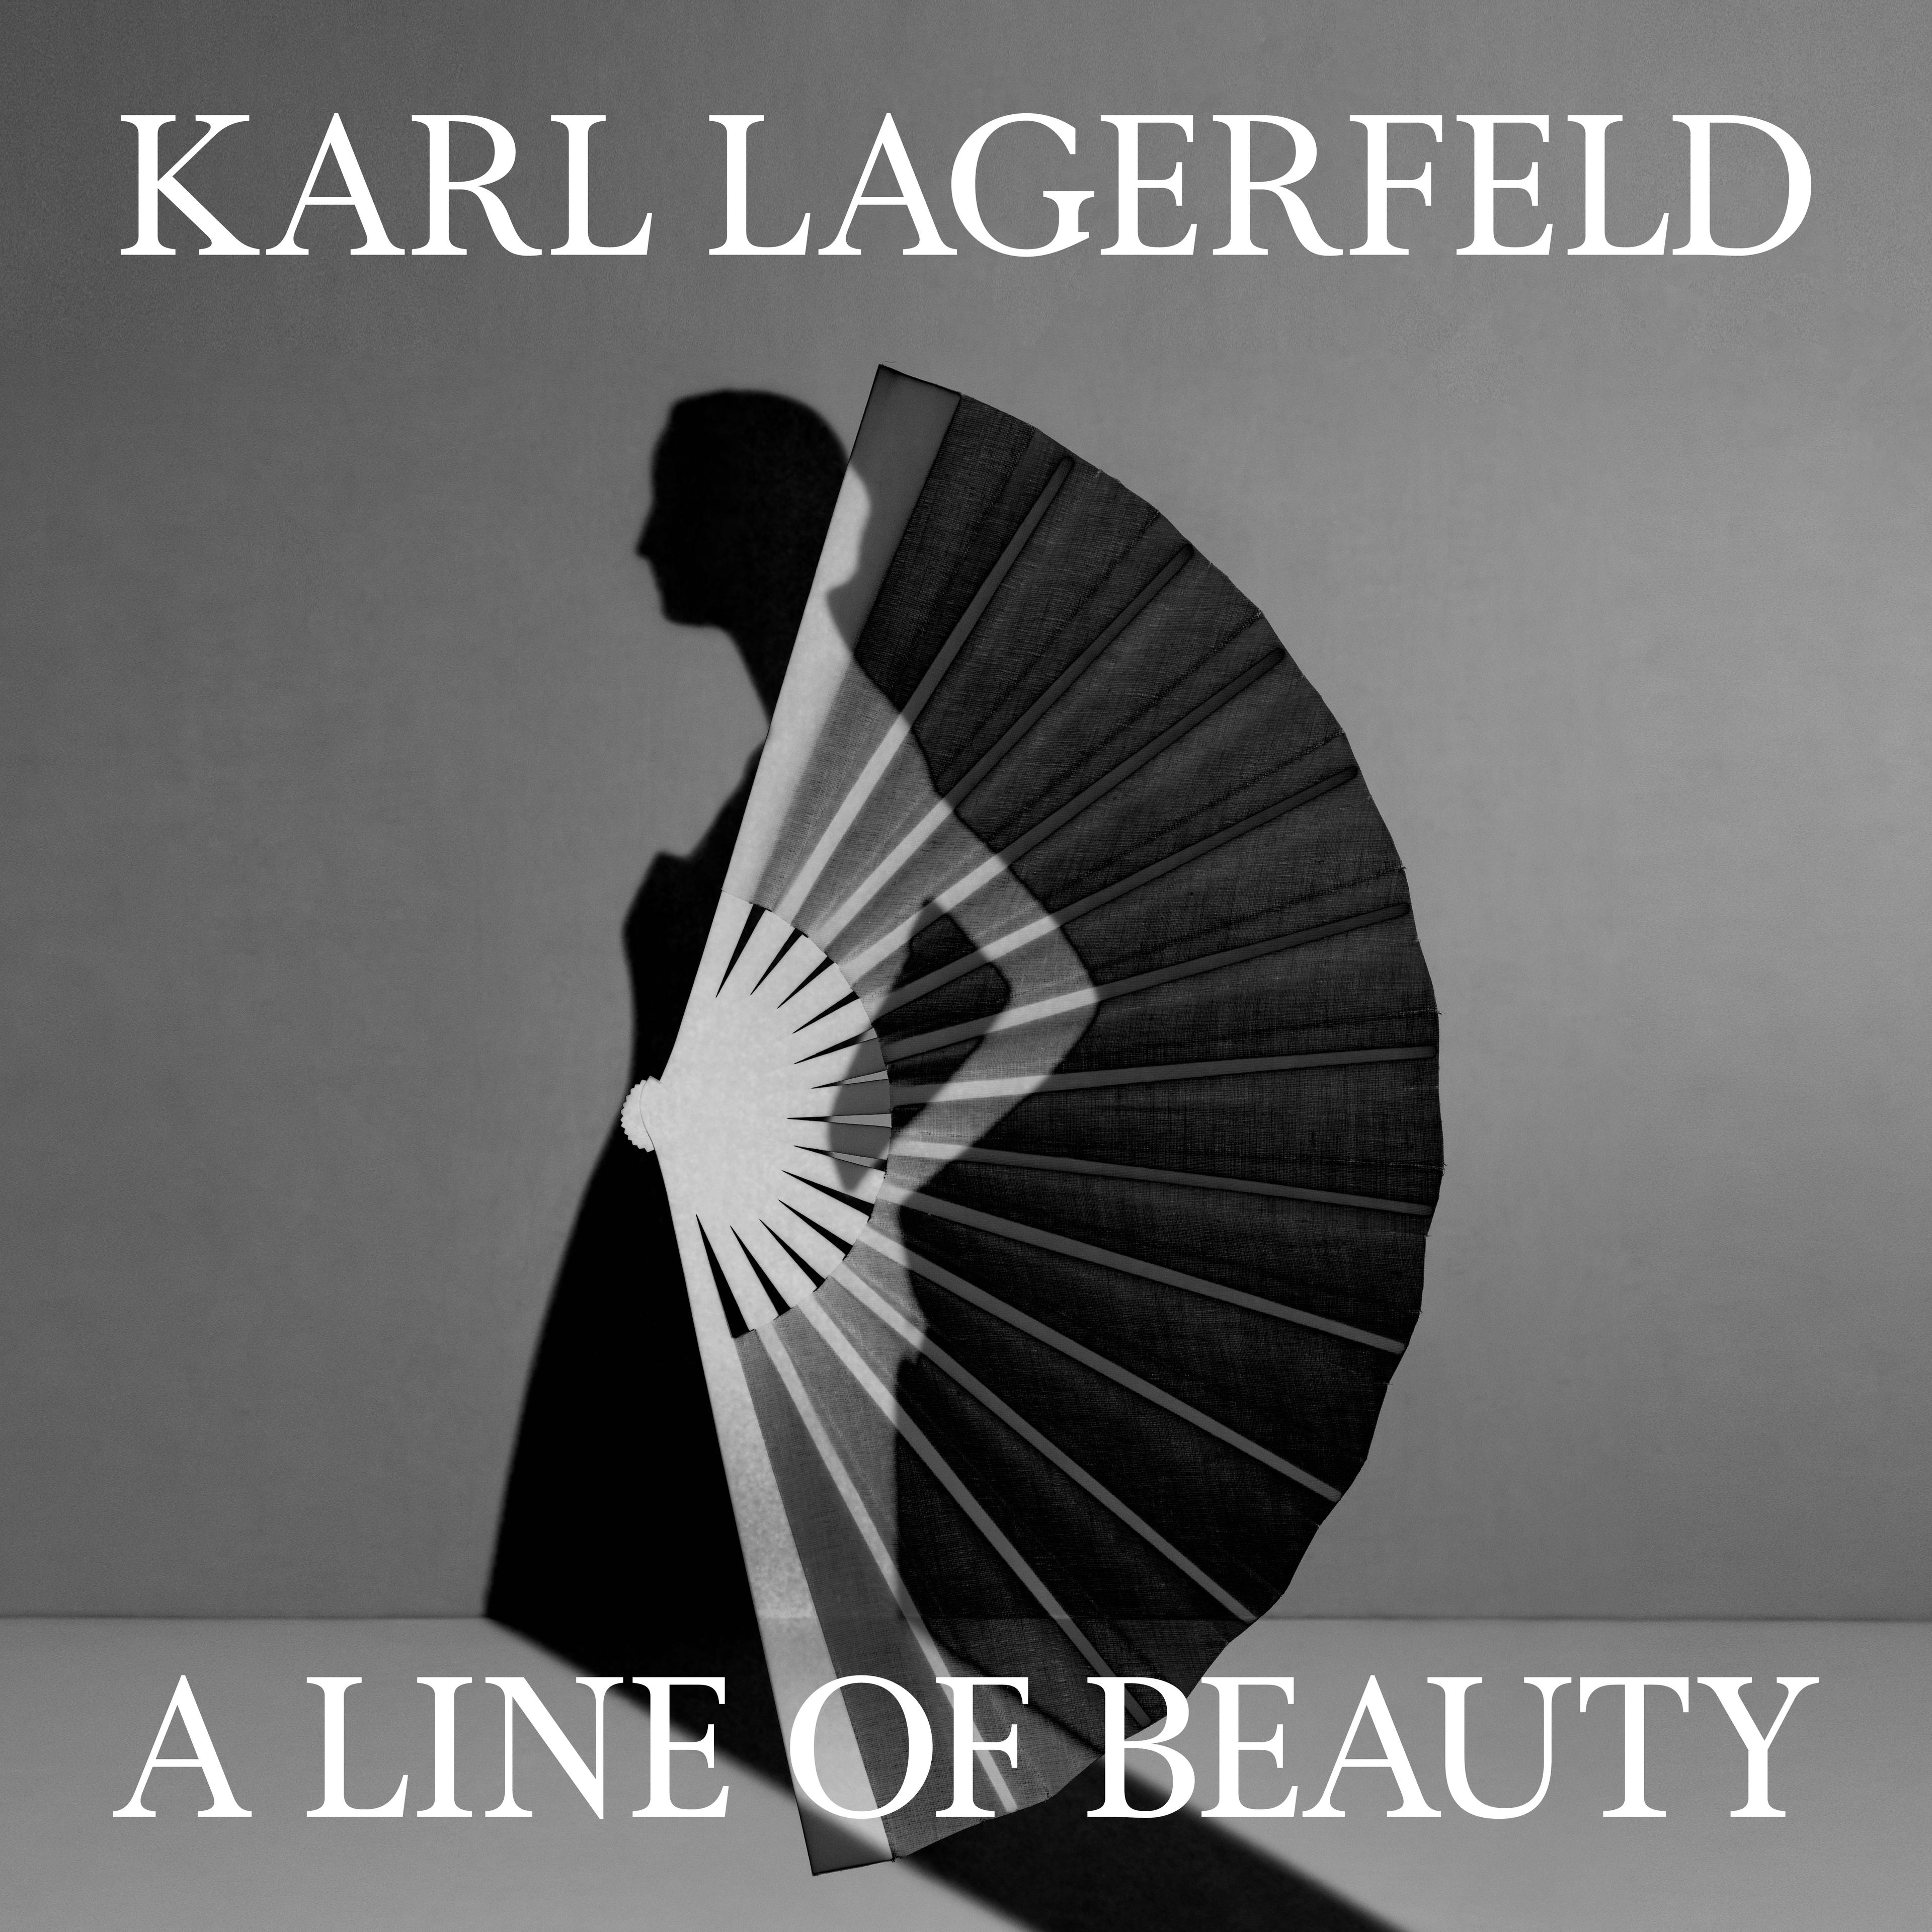 Met Gala 2023 Theme Will Be “Karl Lagerfeld: A Line of Beauty”